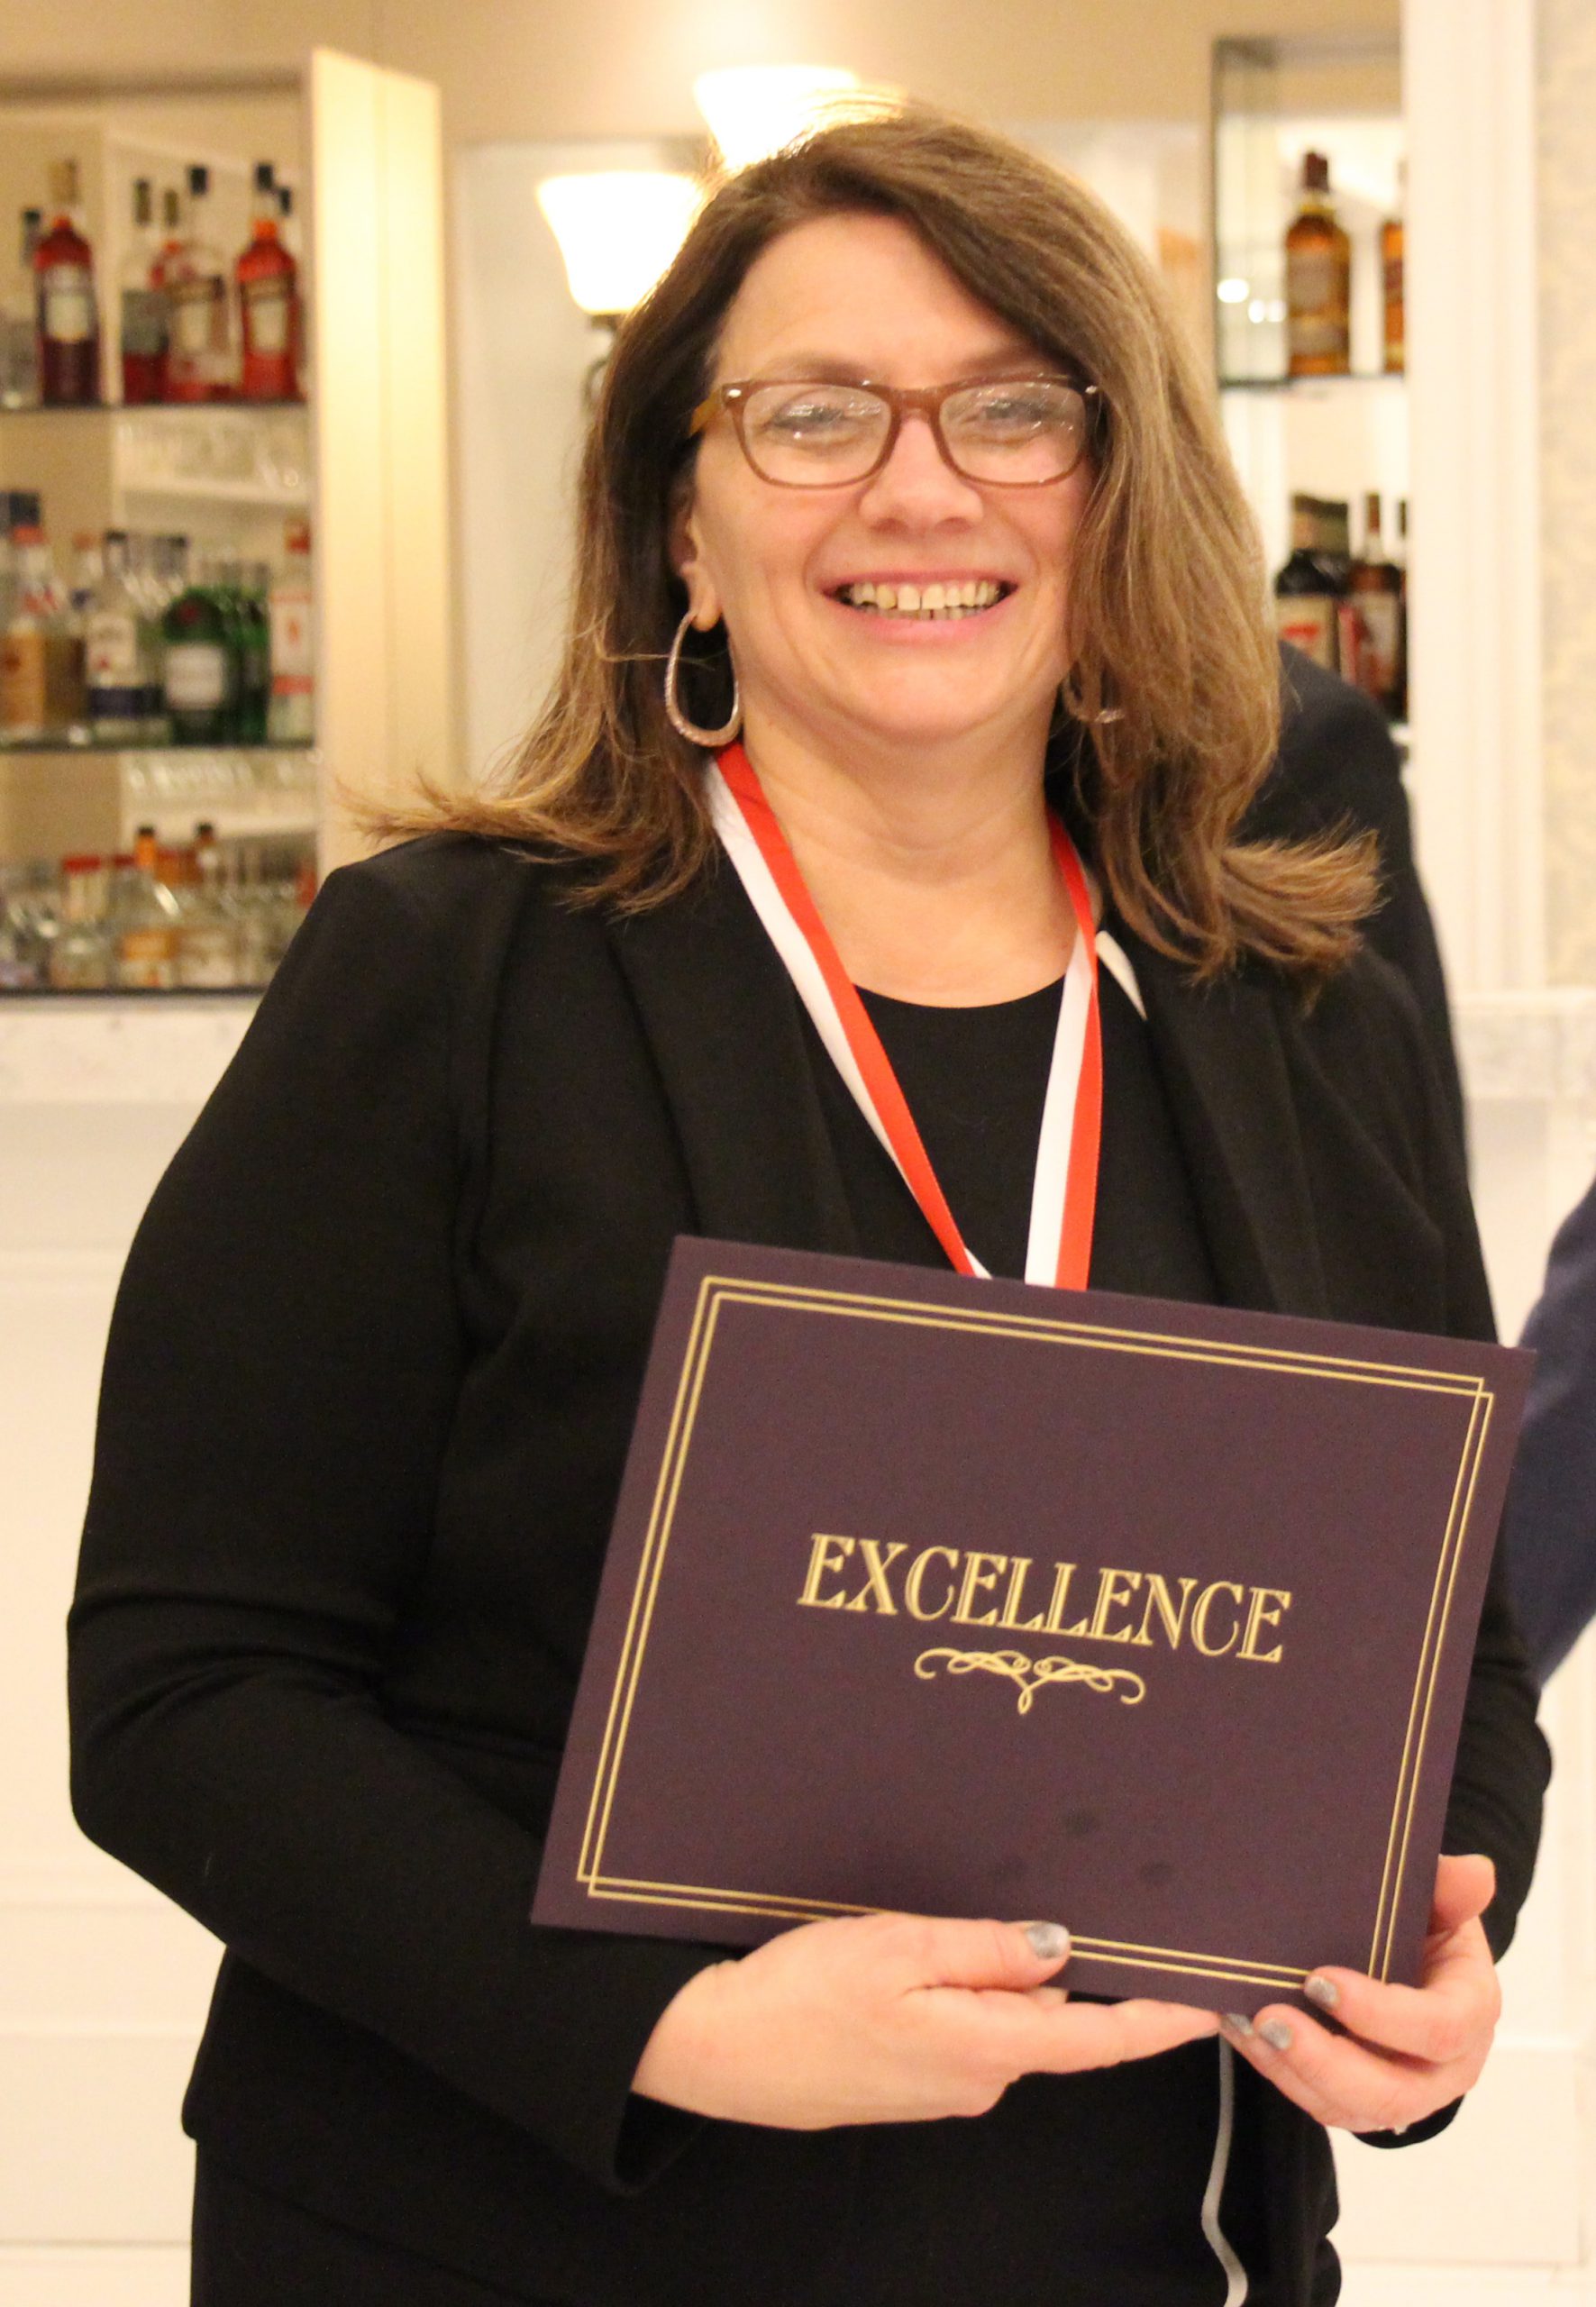 A woman with longer dark hair smiles. She is wearing a black dress, glasses and is holding a certificate that says Excellence on it. She also has a medal around her neck on a red, white and blue ribbon.